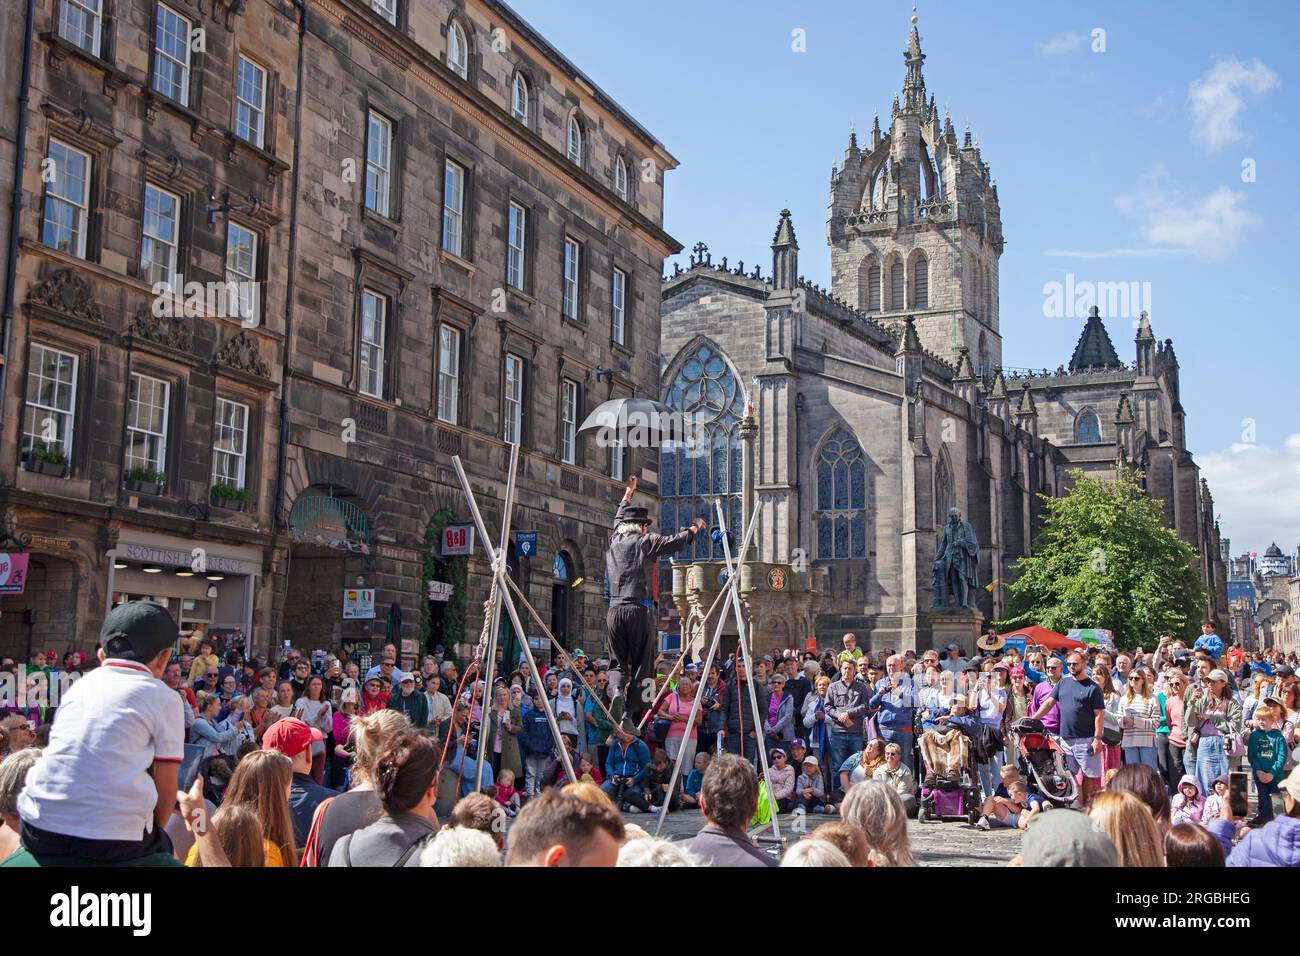 Royal Mile, Edinburgh, Scotland, UK. Busy day at Edinburgh Fringe Festival, large audiences stopping to watch and be entertained by Street Performers on the High Street, helped by the sunshine and warmer weather. Pictured crowds watch Kwabana Lindsay professional street performer. Credit: Archwhite/alamy live news. Stock Photo